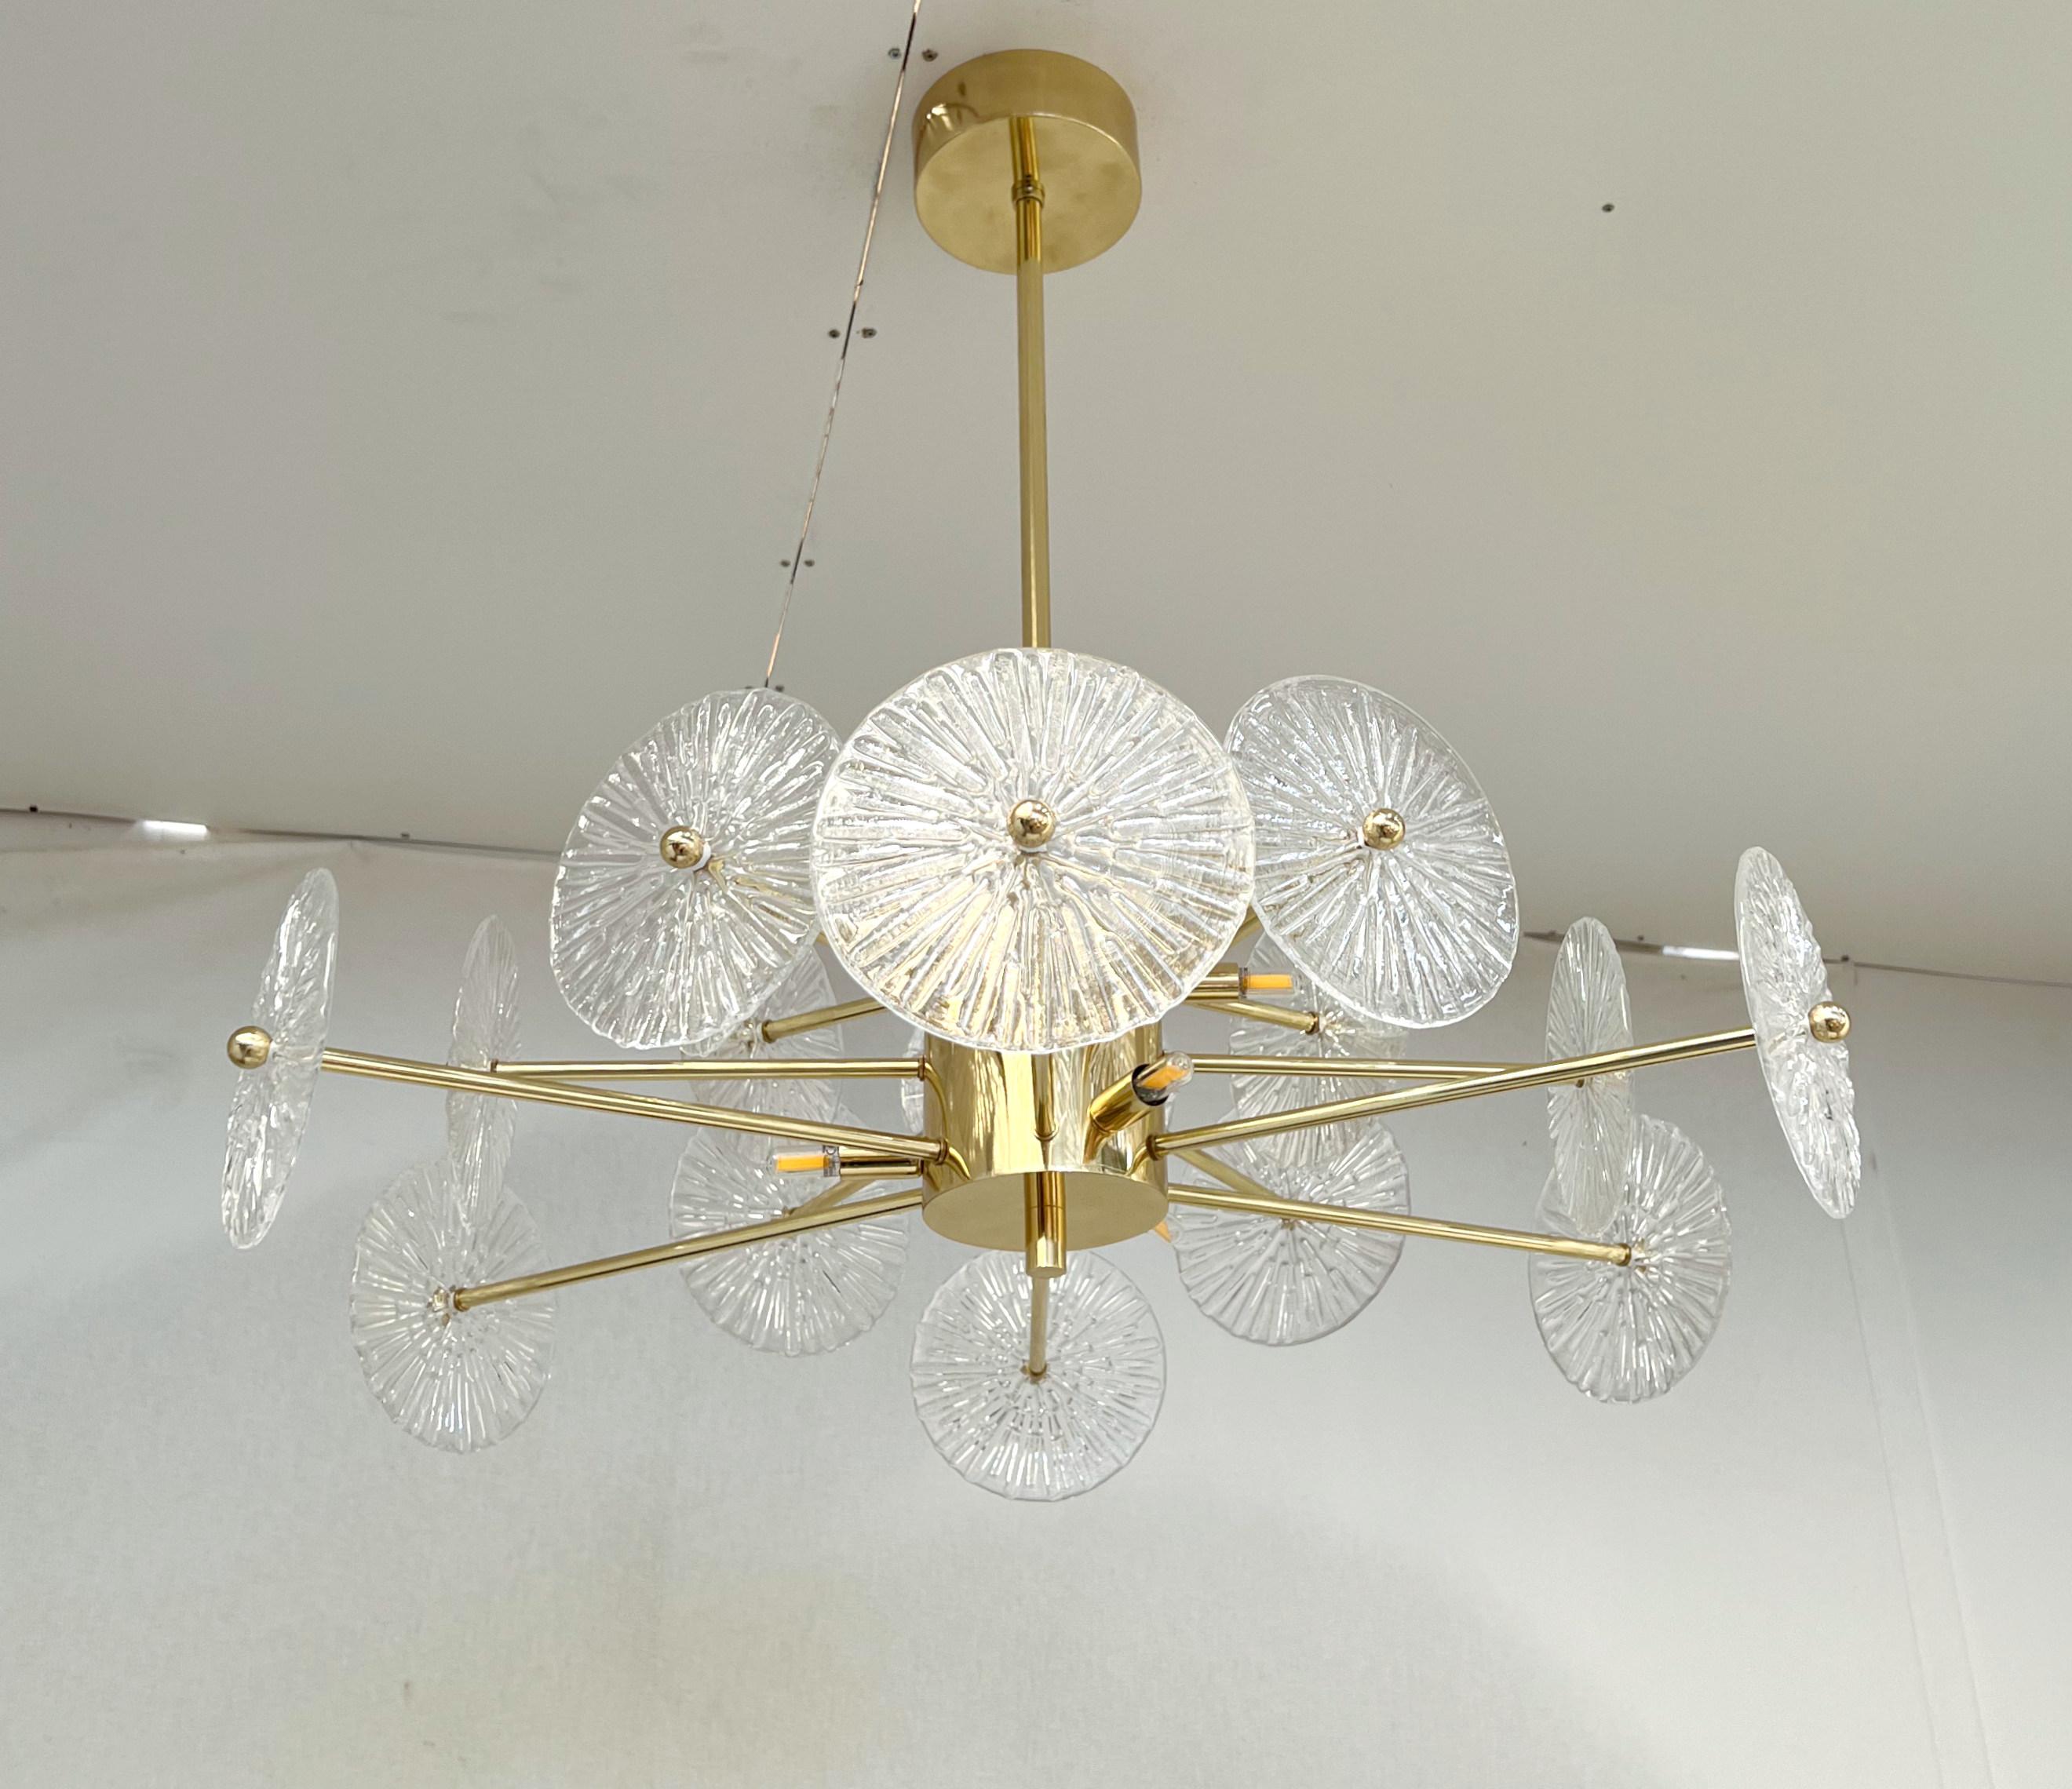 Italian chandelier with clear textured Murano glass discs mounted on lacquered polished brass finish frame, designed by Fabio Bergomi for Fabio Ltd / Made in Italy
6 lights / G9 type / max 40W each.
Measures: diameter: 29.5 inches / height: 27.5